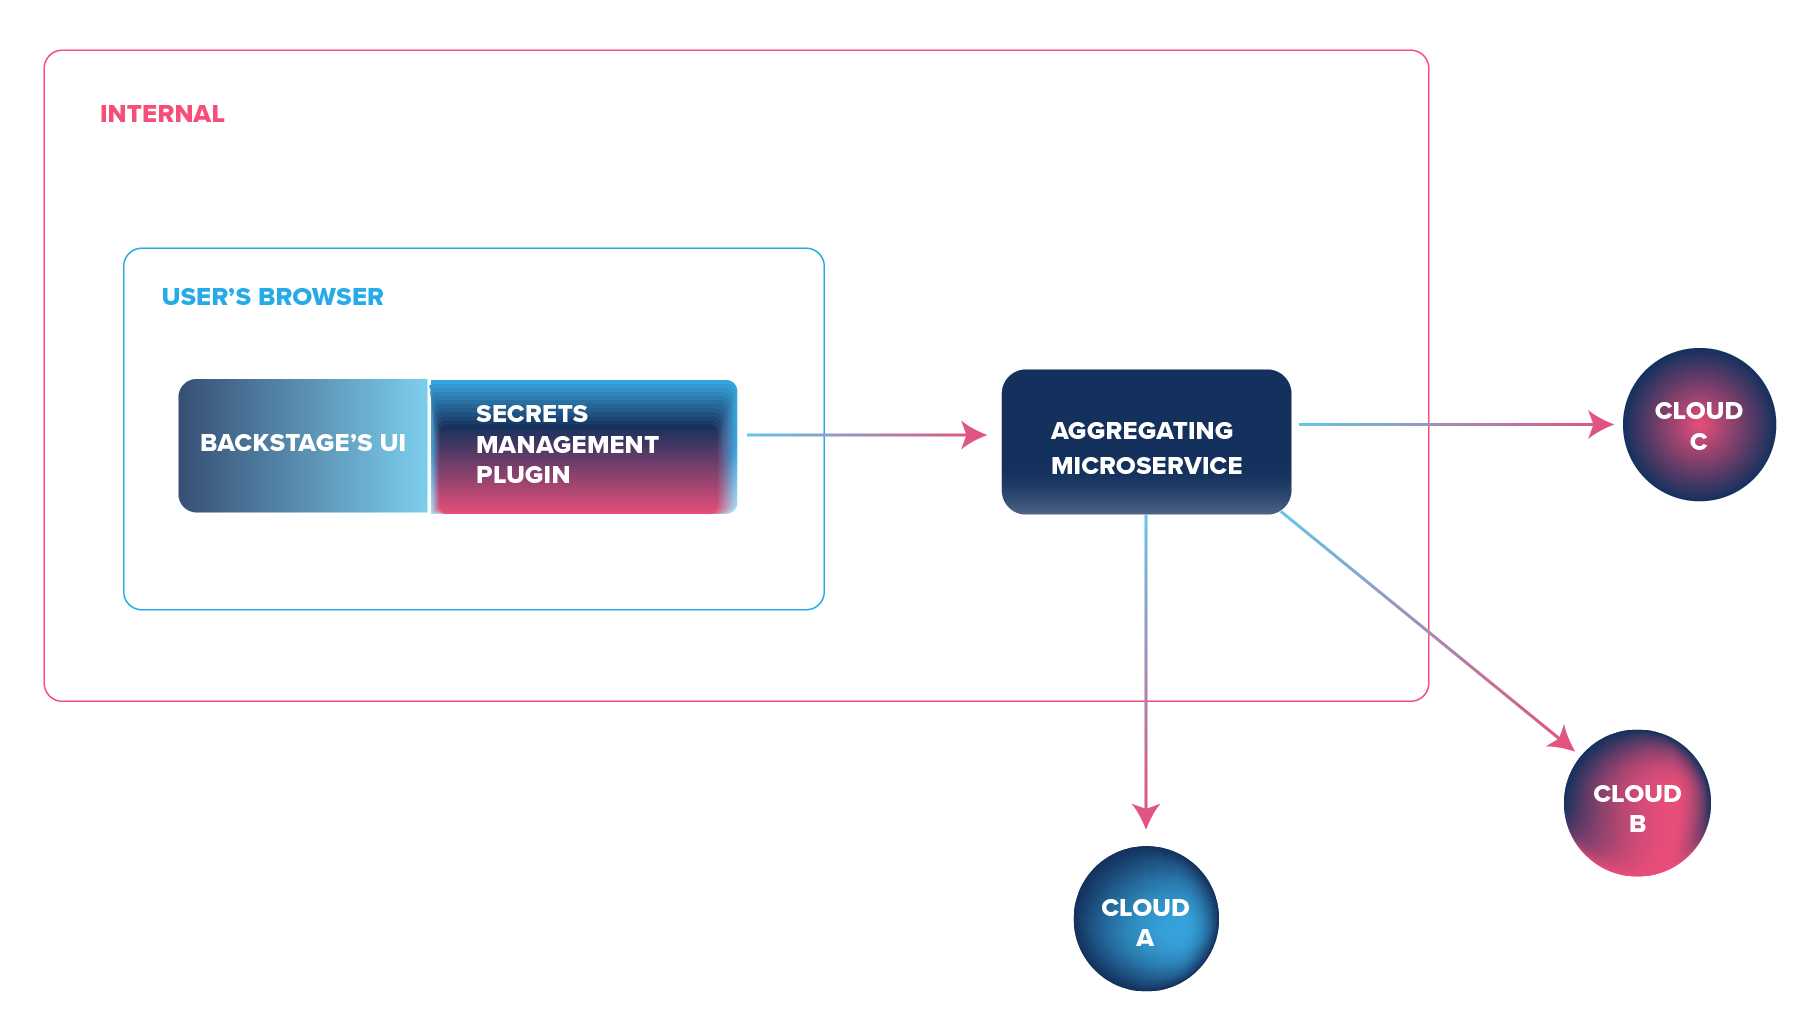 Architecture diagram for the plugin. The secret manager plugin is inserted in Backstage's UI, which is all rendered in the user's browser. This UI communicates with an aggregating microservice, that contacts external Cloud providres